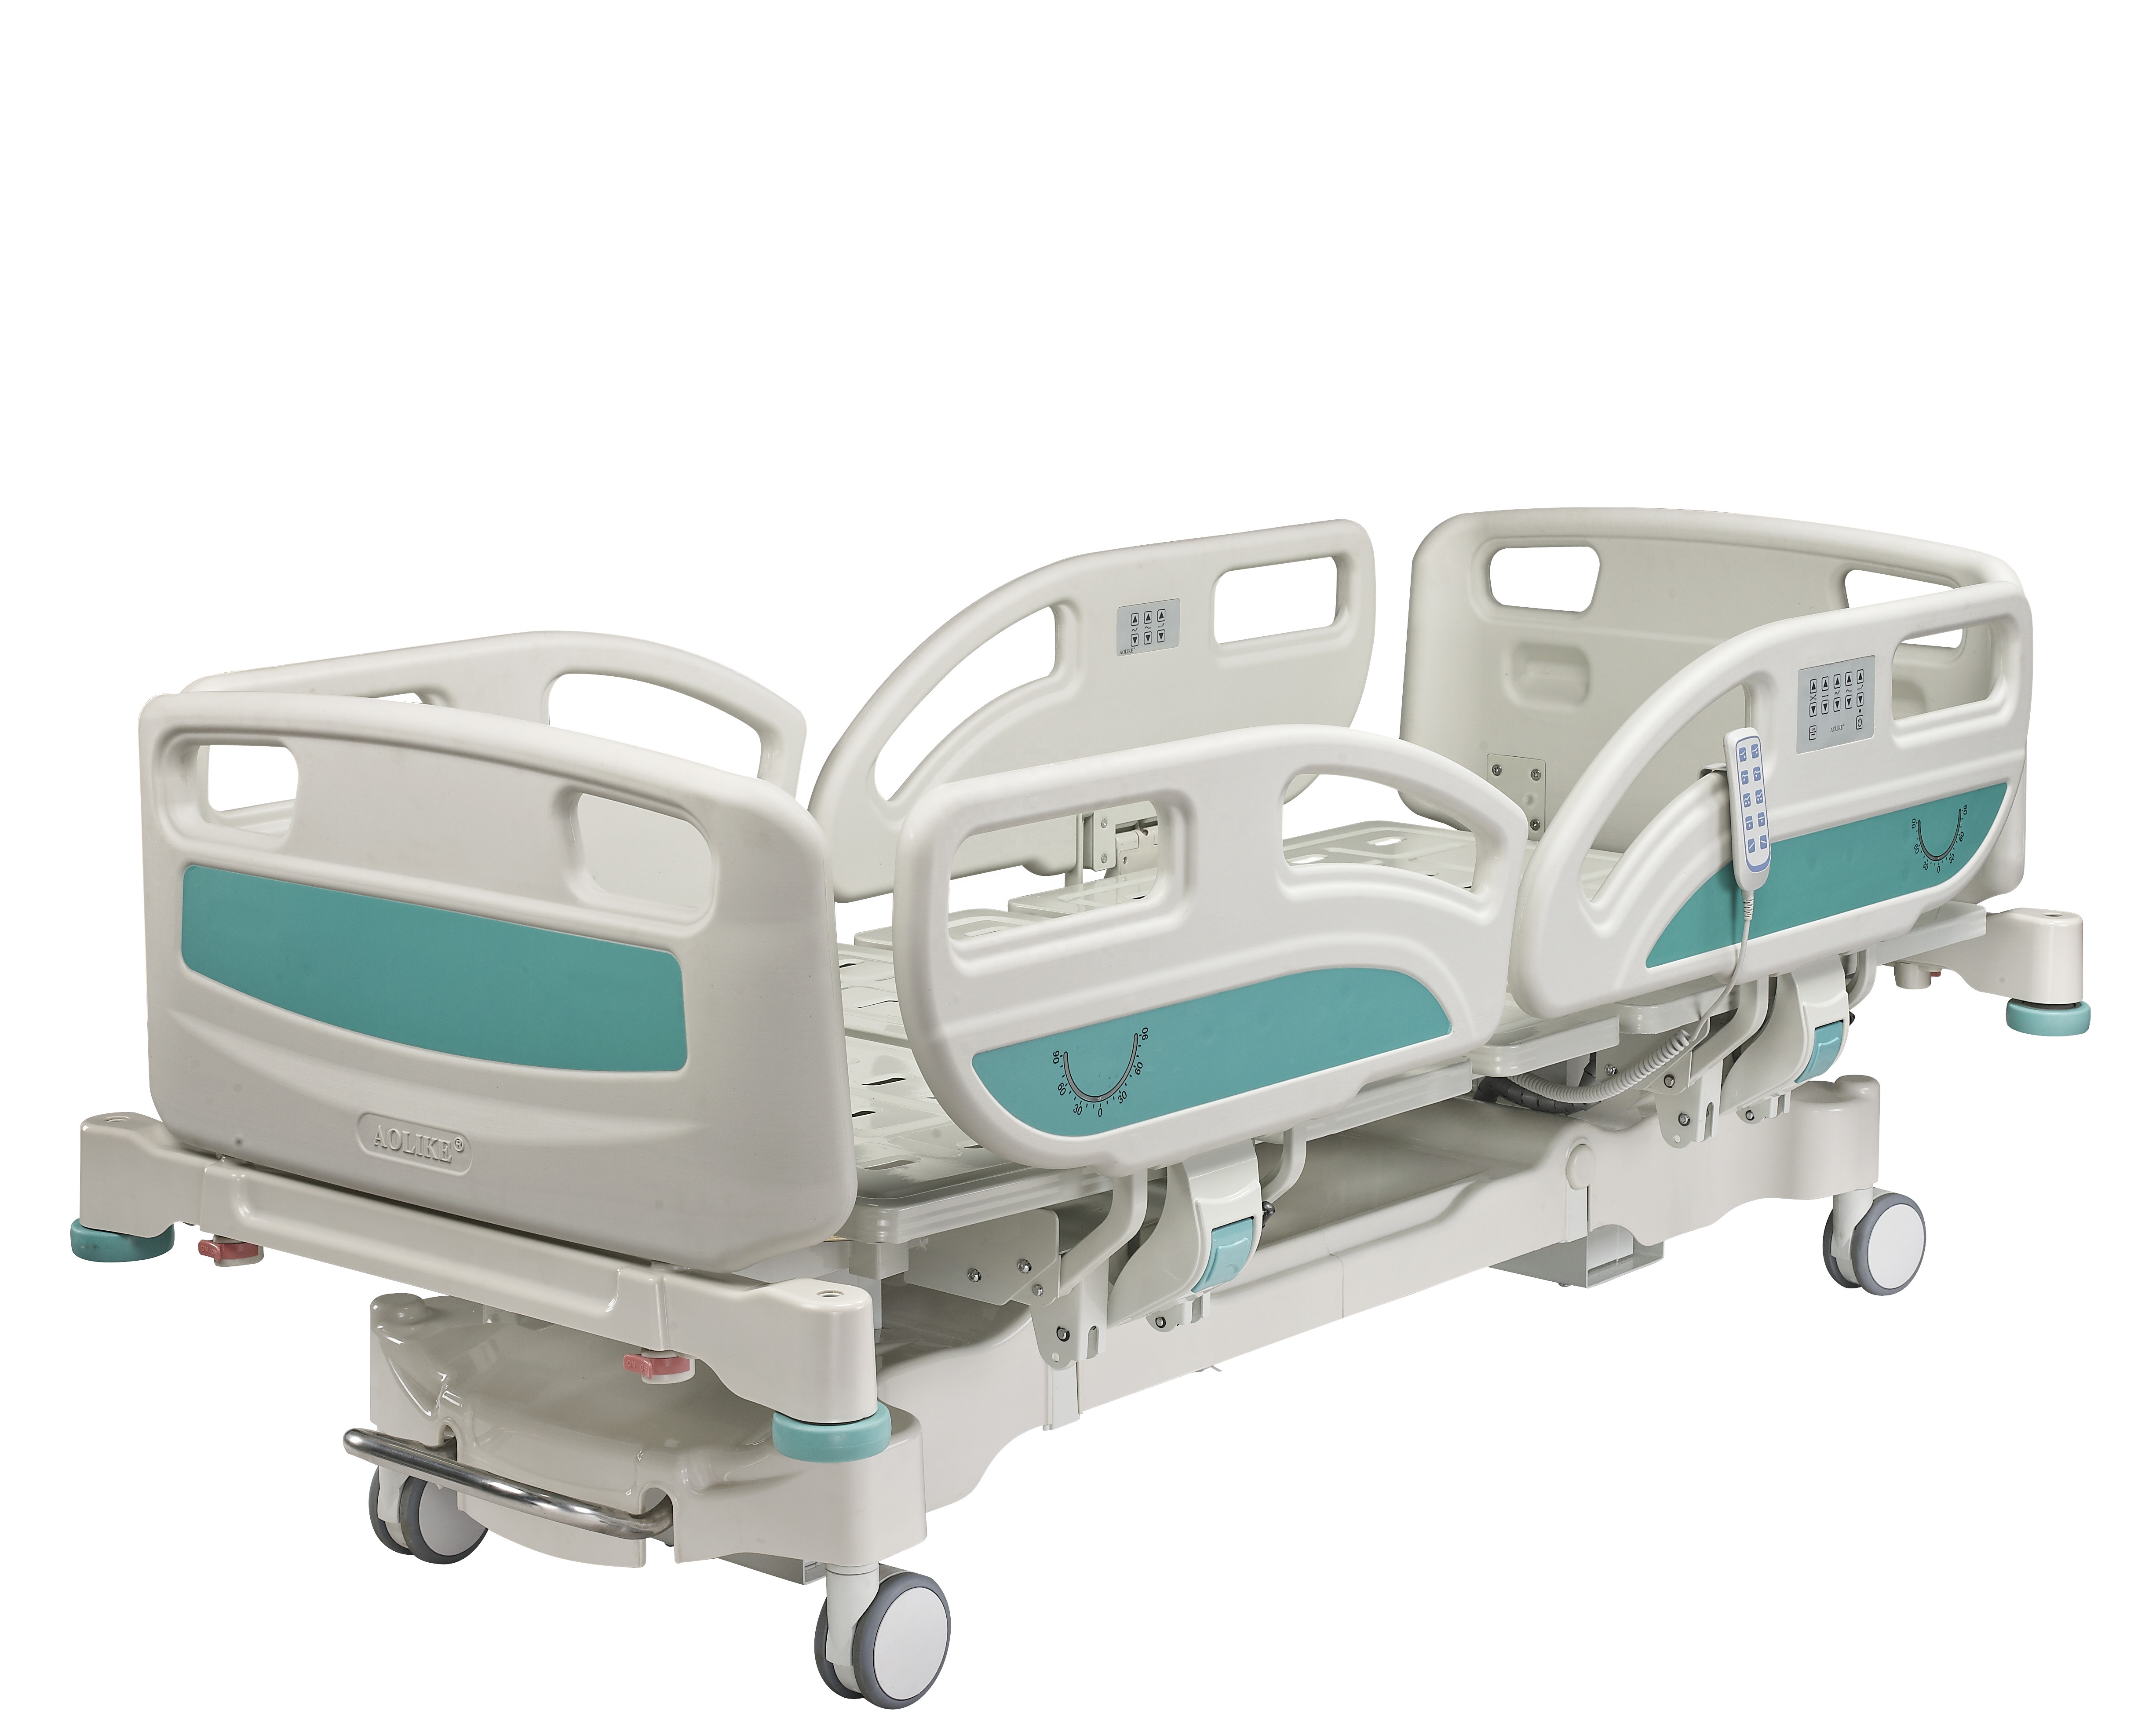 Unused Advanced 5 Function CE ISO Quality Electric ICU Hospital Beds Metal for Hospital Use ALK06-BA508EZE 1 YEAR ICU Room